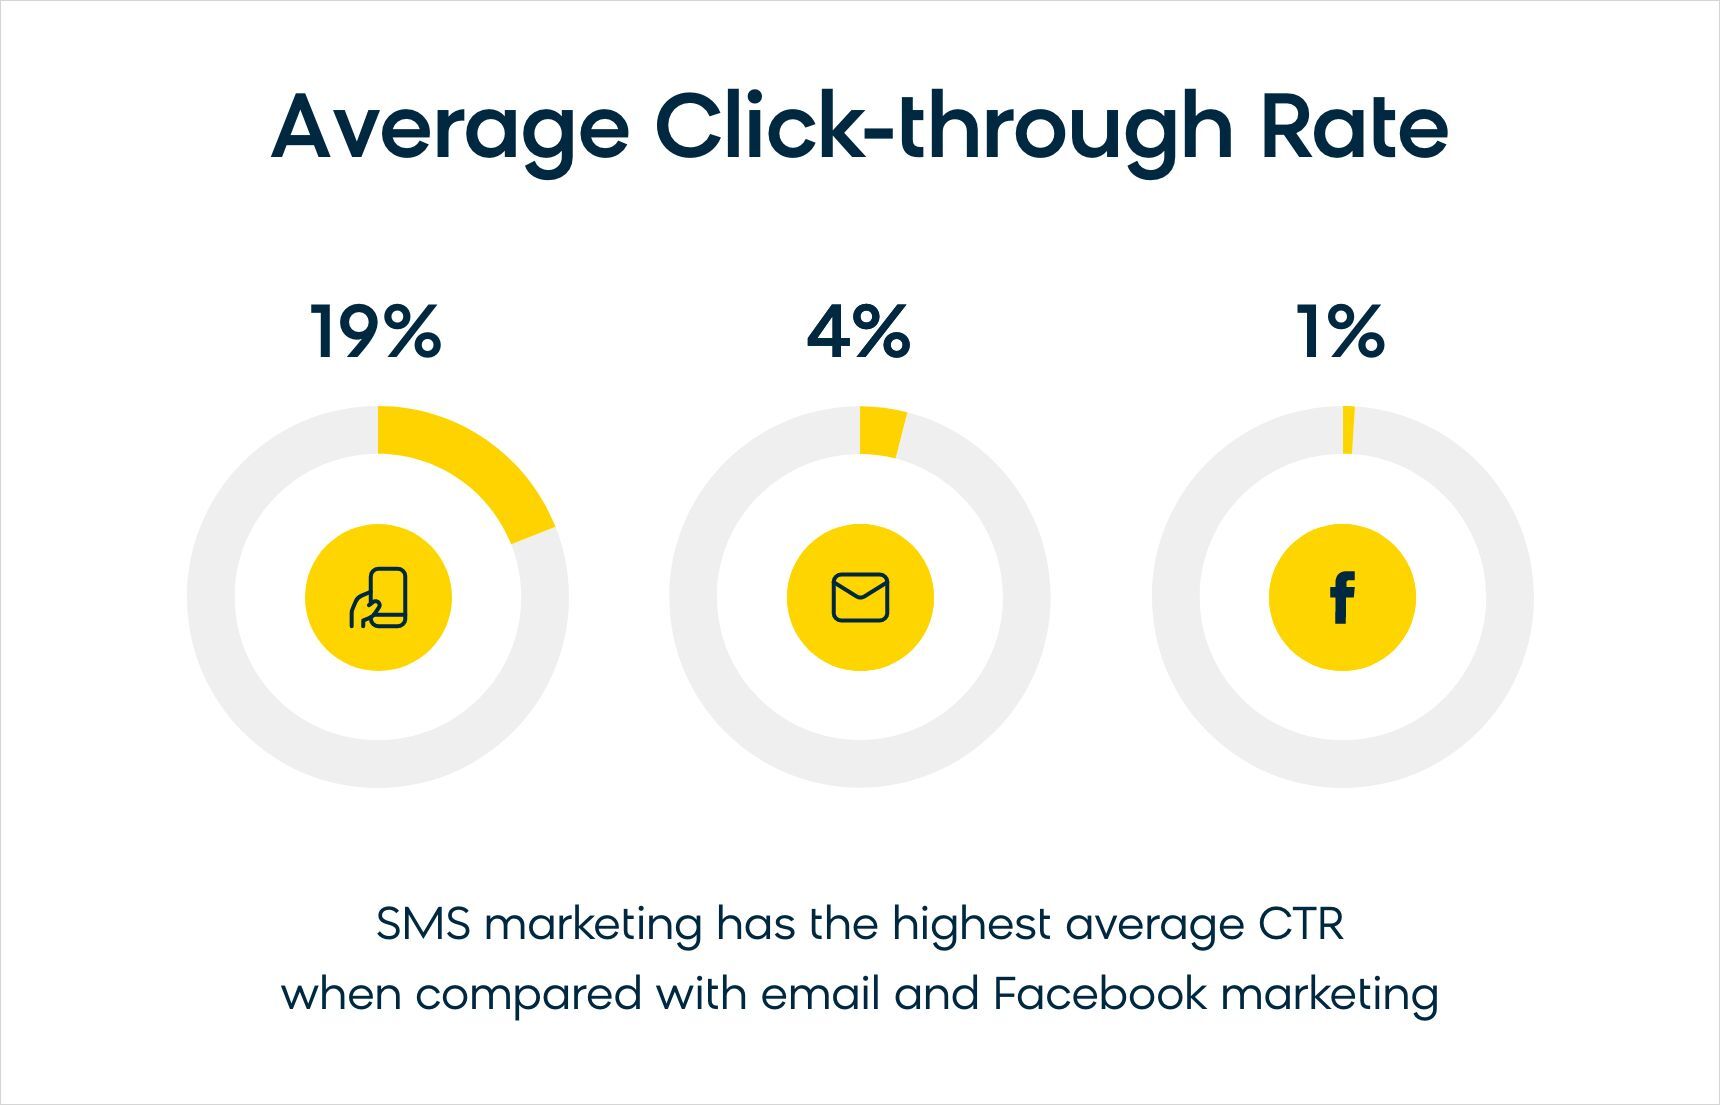 On average, SMS marketing yields a 19% click-through rate (CTR).